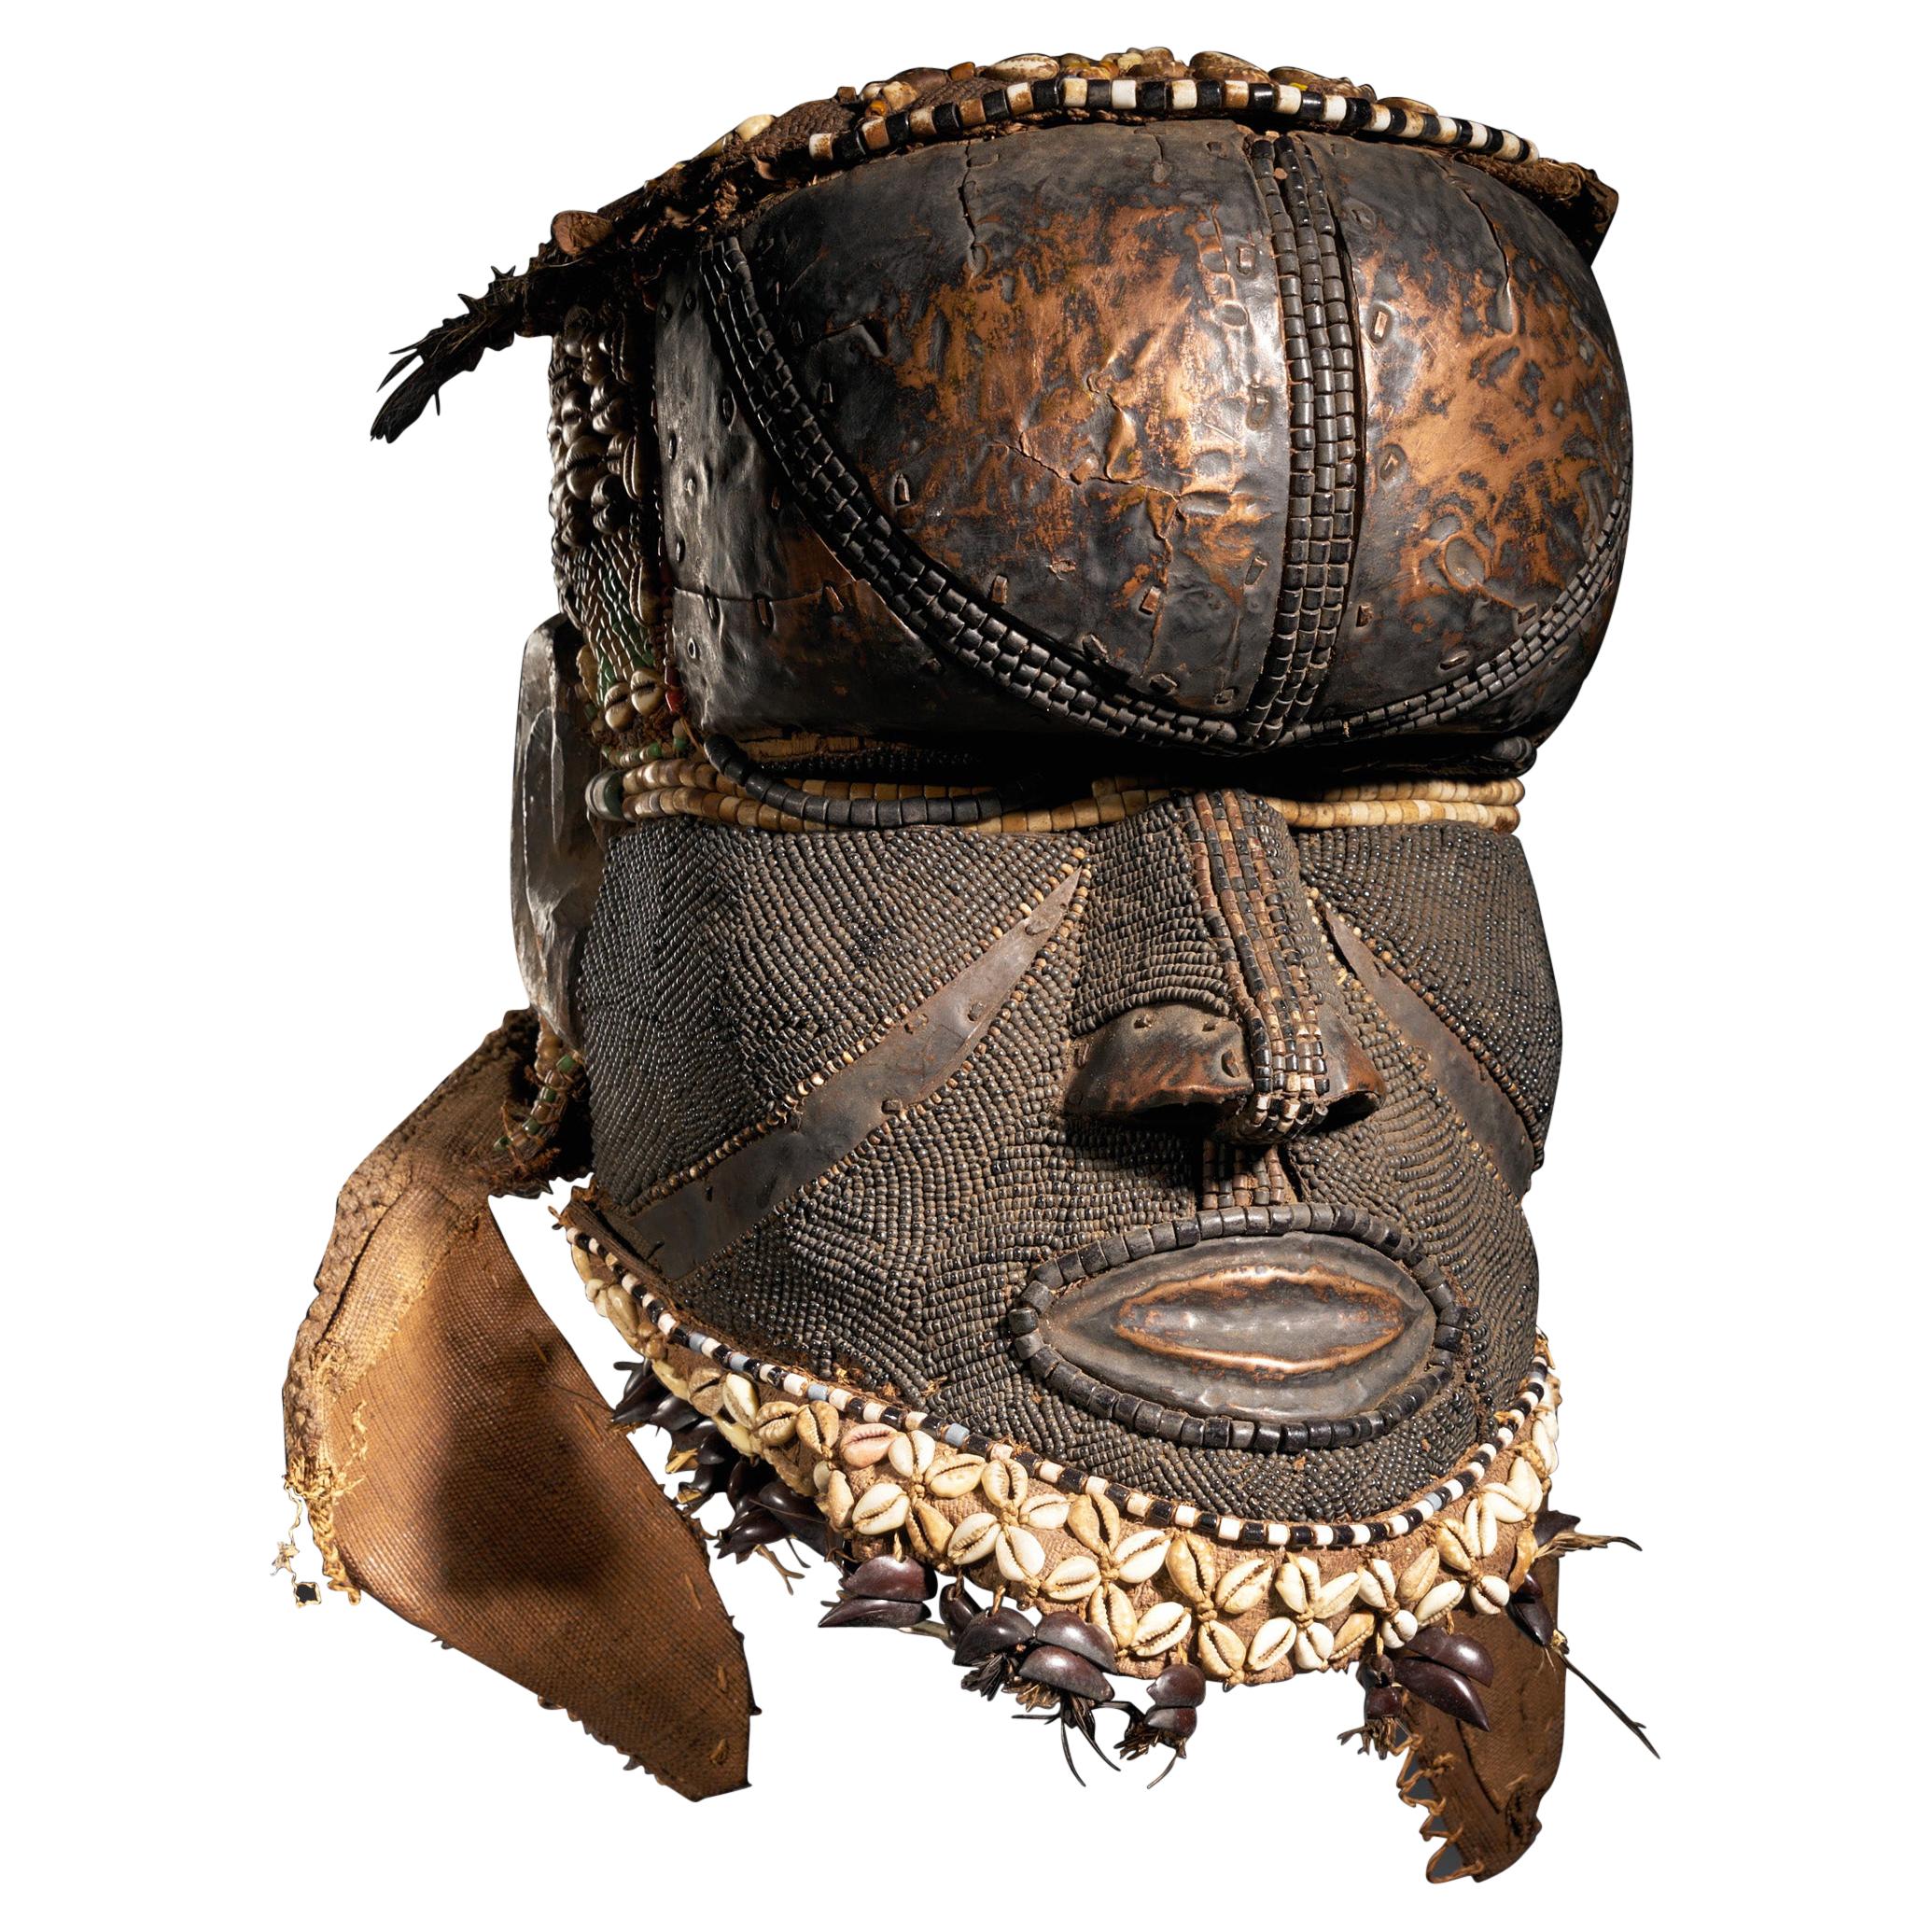 Kuba People, DRC, Very Strong Bwoon Mask with Copper Alloy Finish